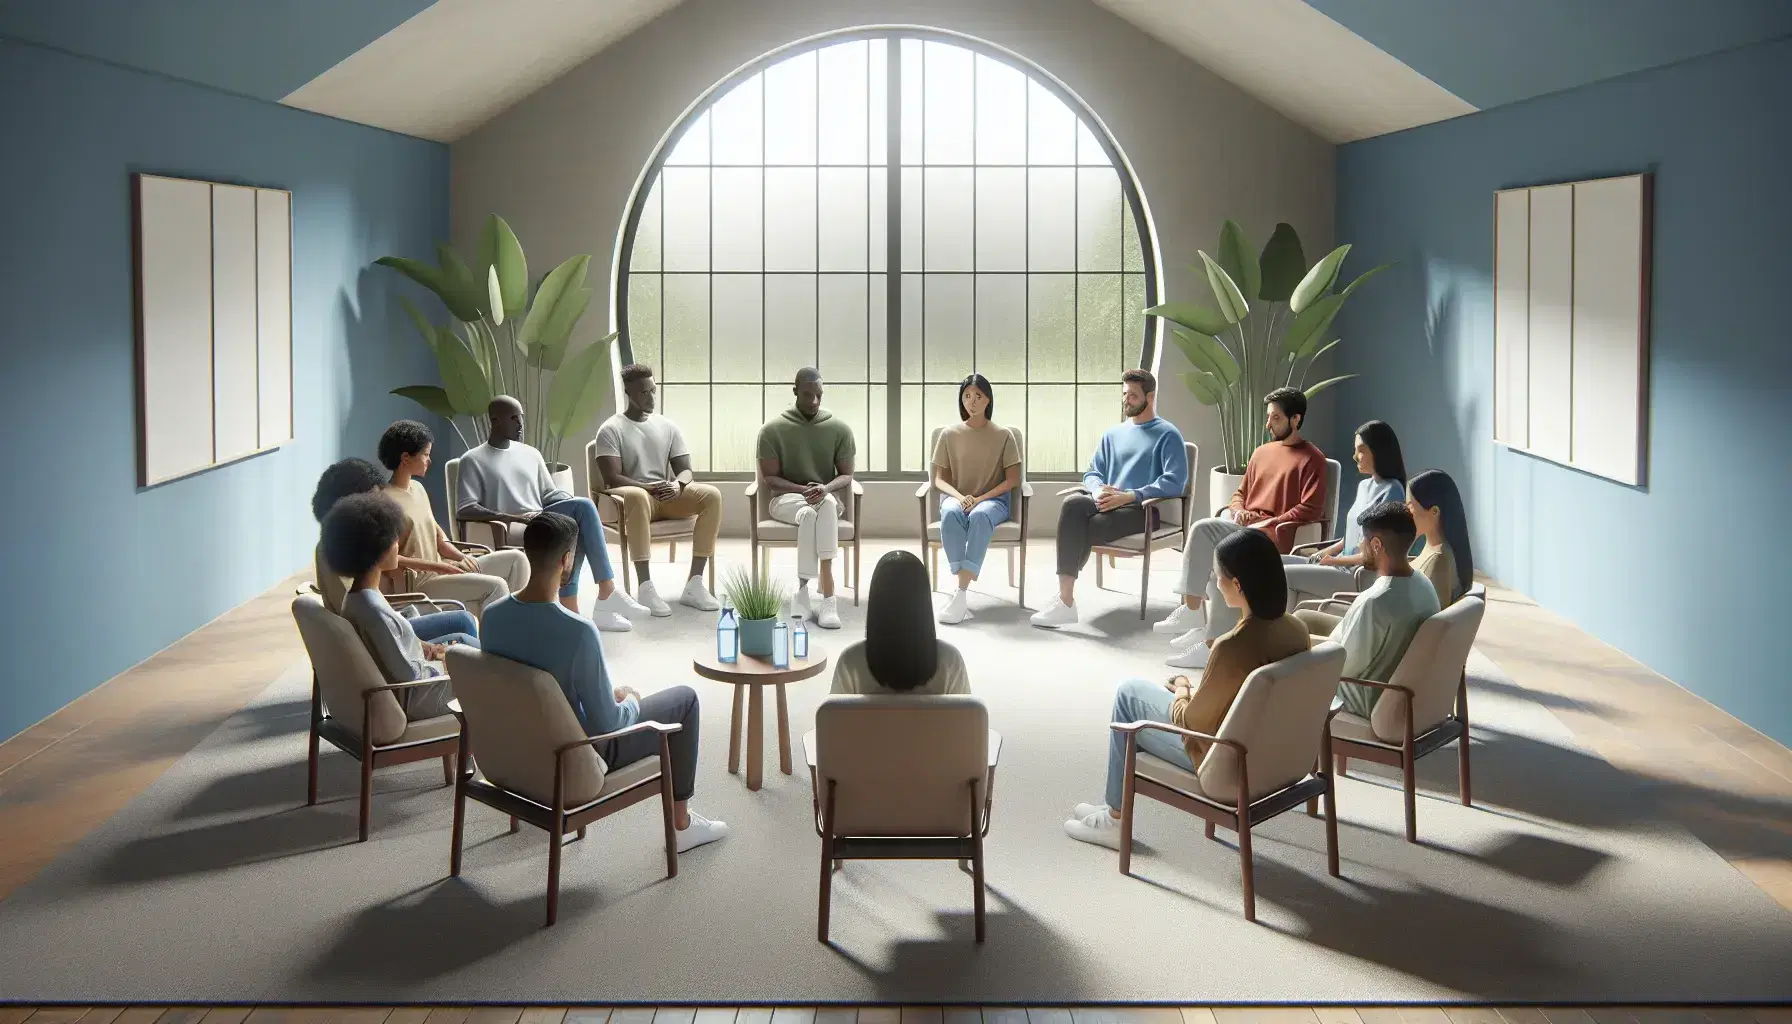 Group therapy session with attentive people of different ethnicities, sitting in a circle in a bright room with plants and table with water.